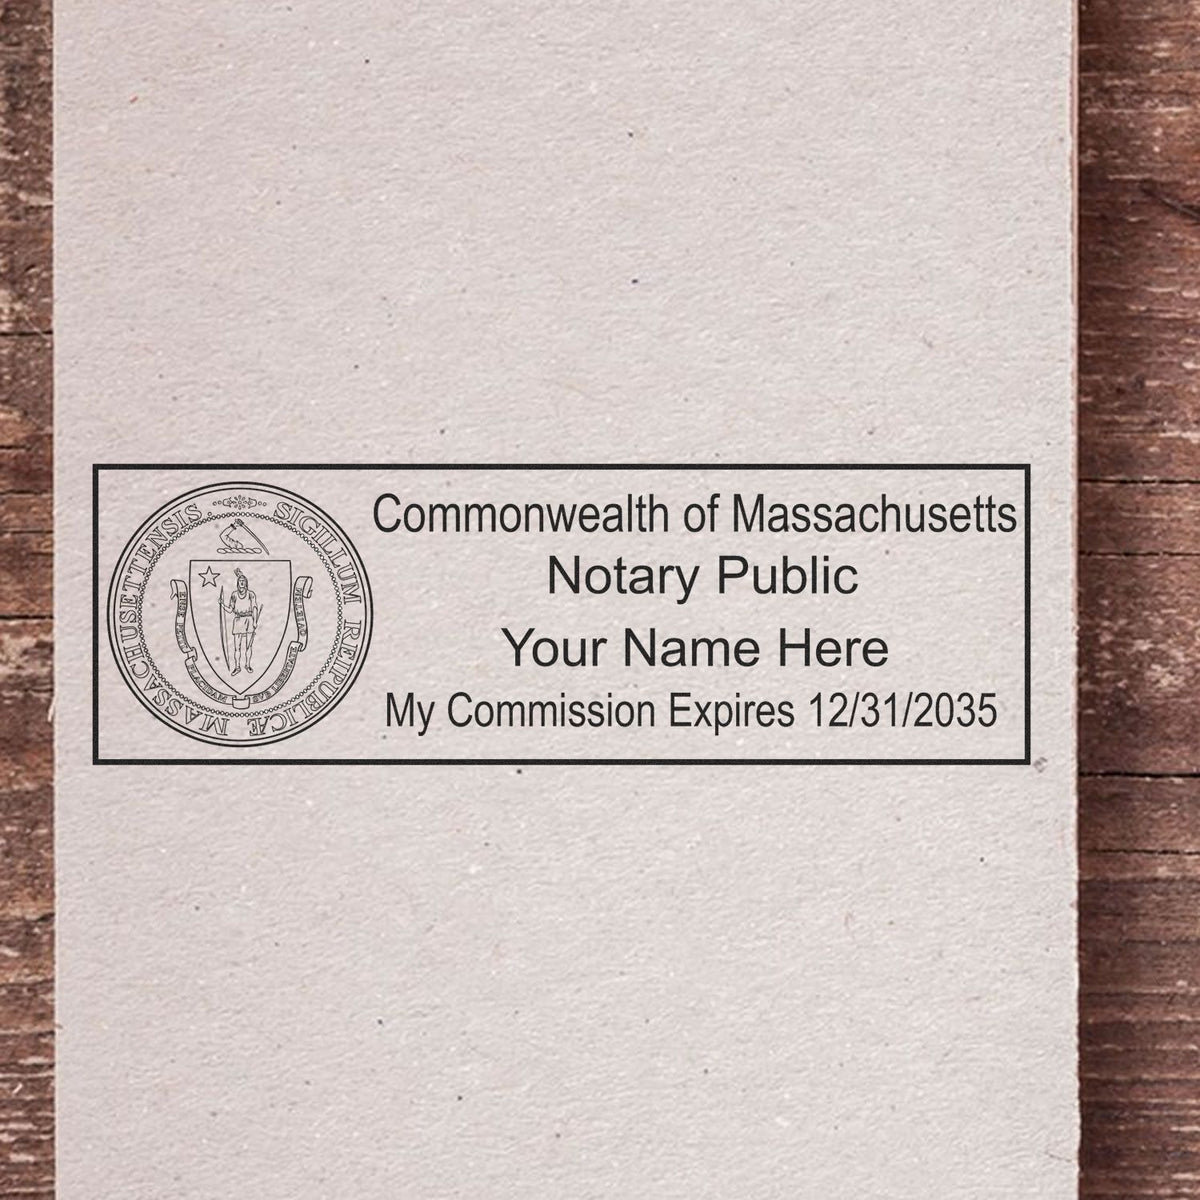 The PSI Massachusetts Notary Stamp stamp impression comes to life with a crisp, detailed photo on paper - showcasing true professional quality.